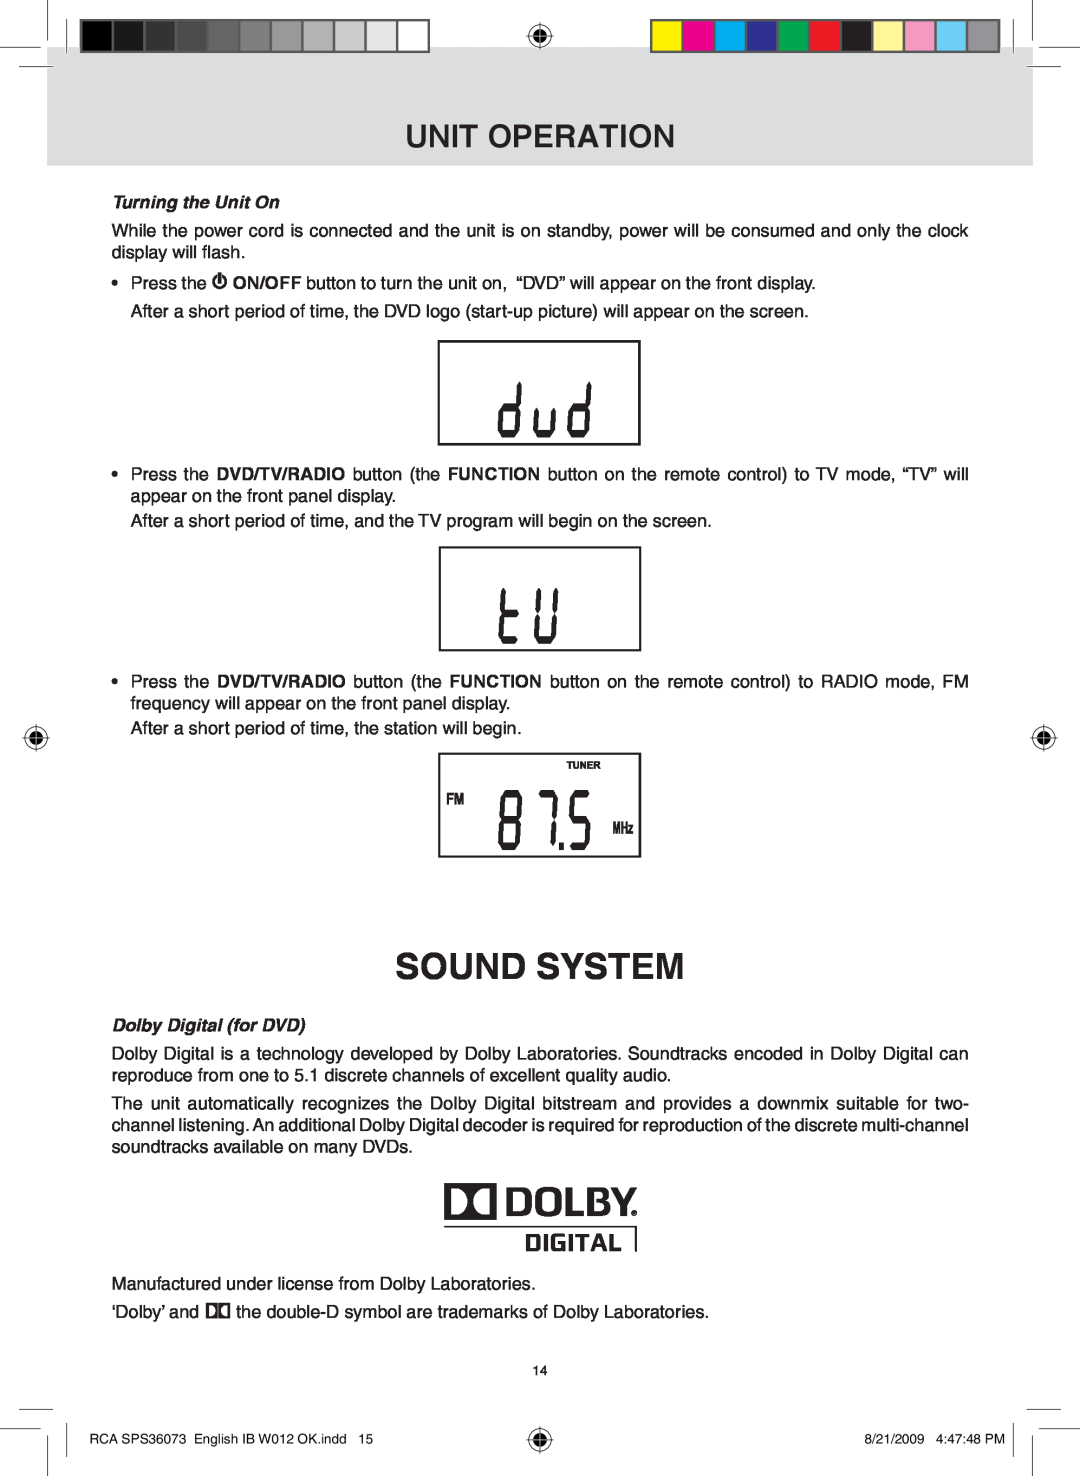 RCA SPS36073 owner manual Unit Operation, Turning the Unit On, Dolby Digital for DVD, Sound System 